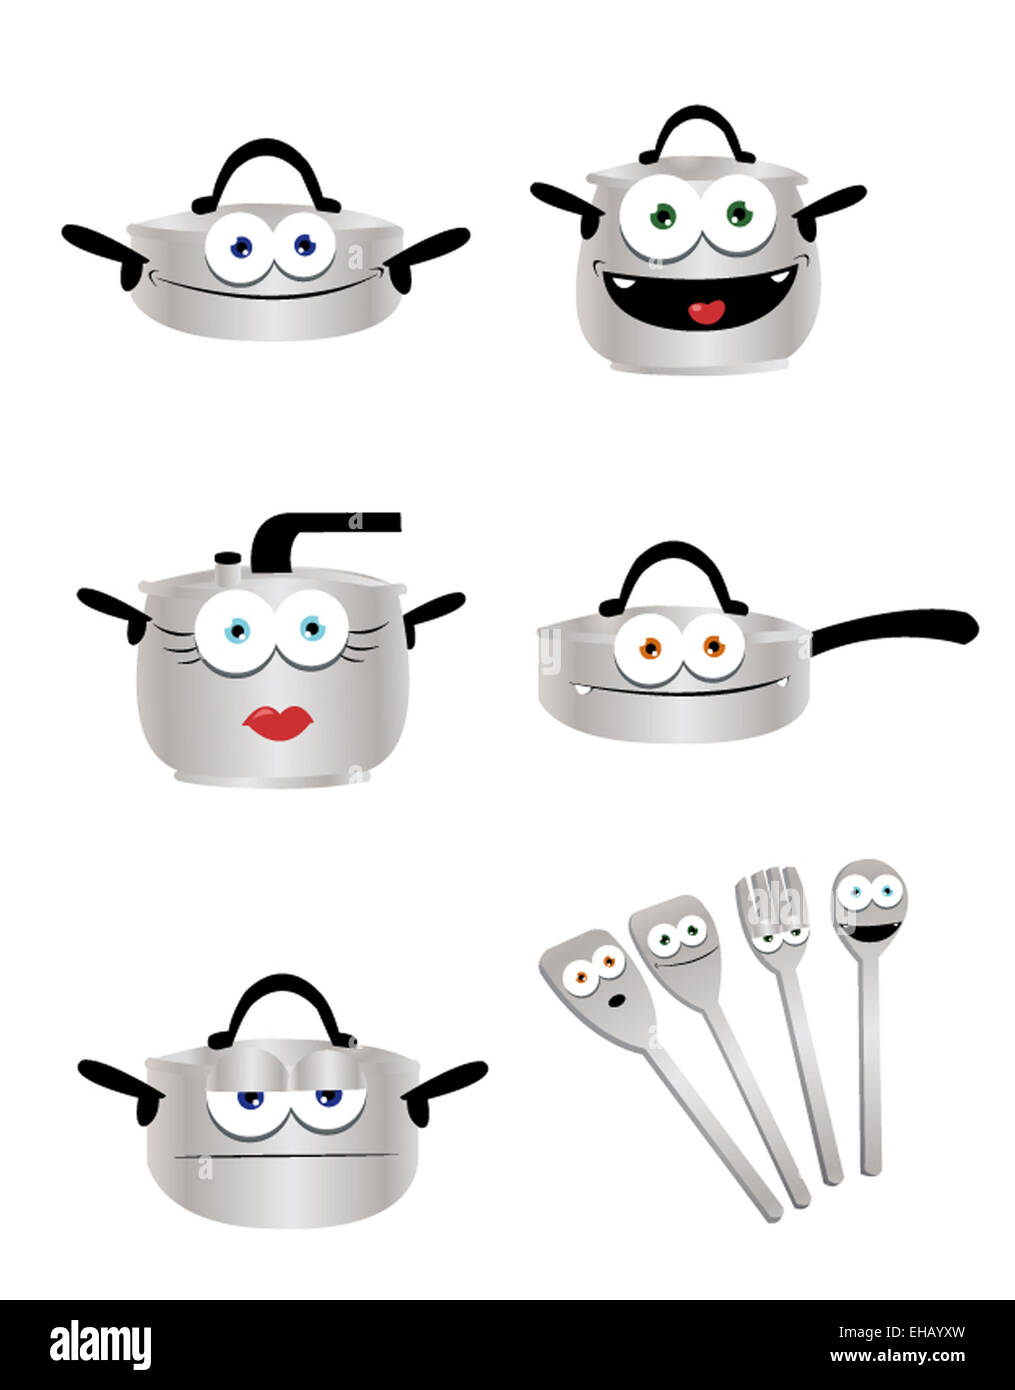 a vector cartoon representing some funny pots and other cooking tools Stock Photo